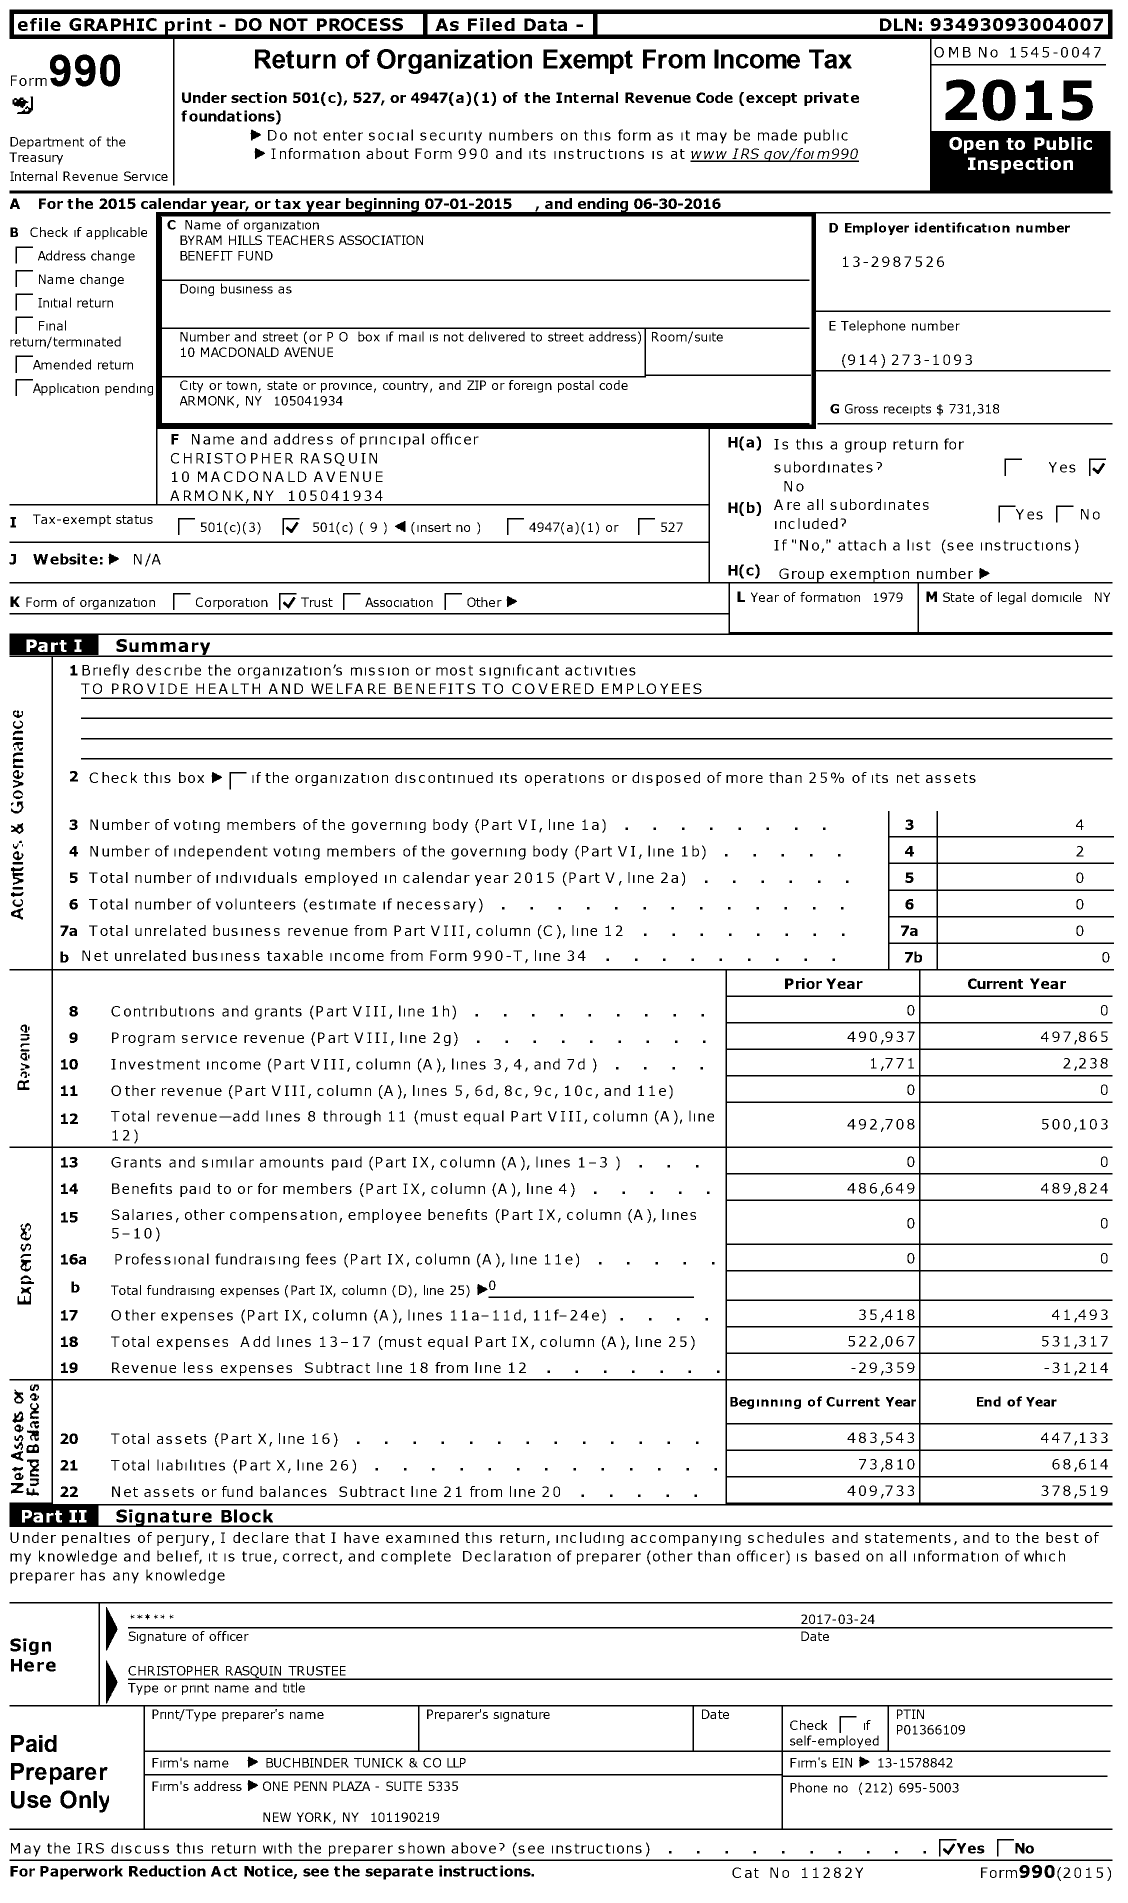 Image of first page of 2015 Form 990O for Byram Hills Teachers Association Benefit Fund